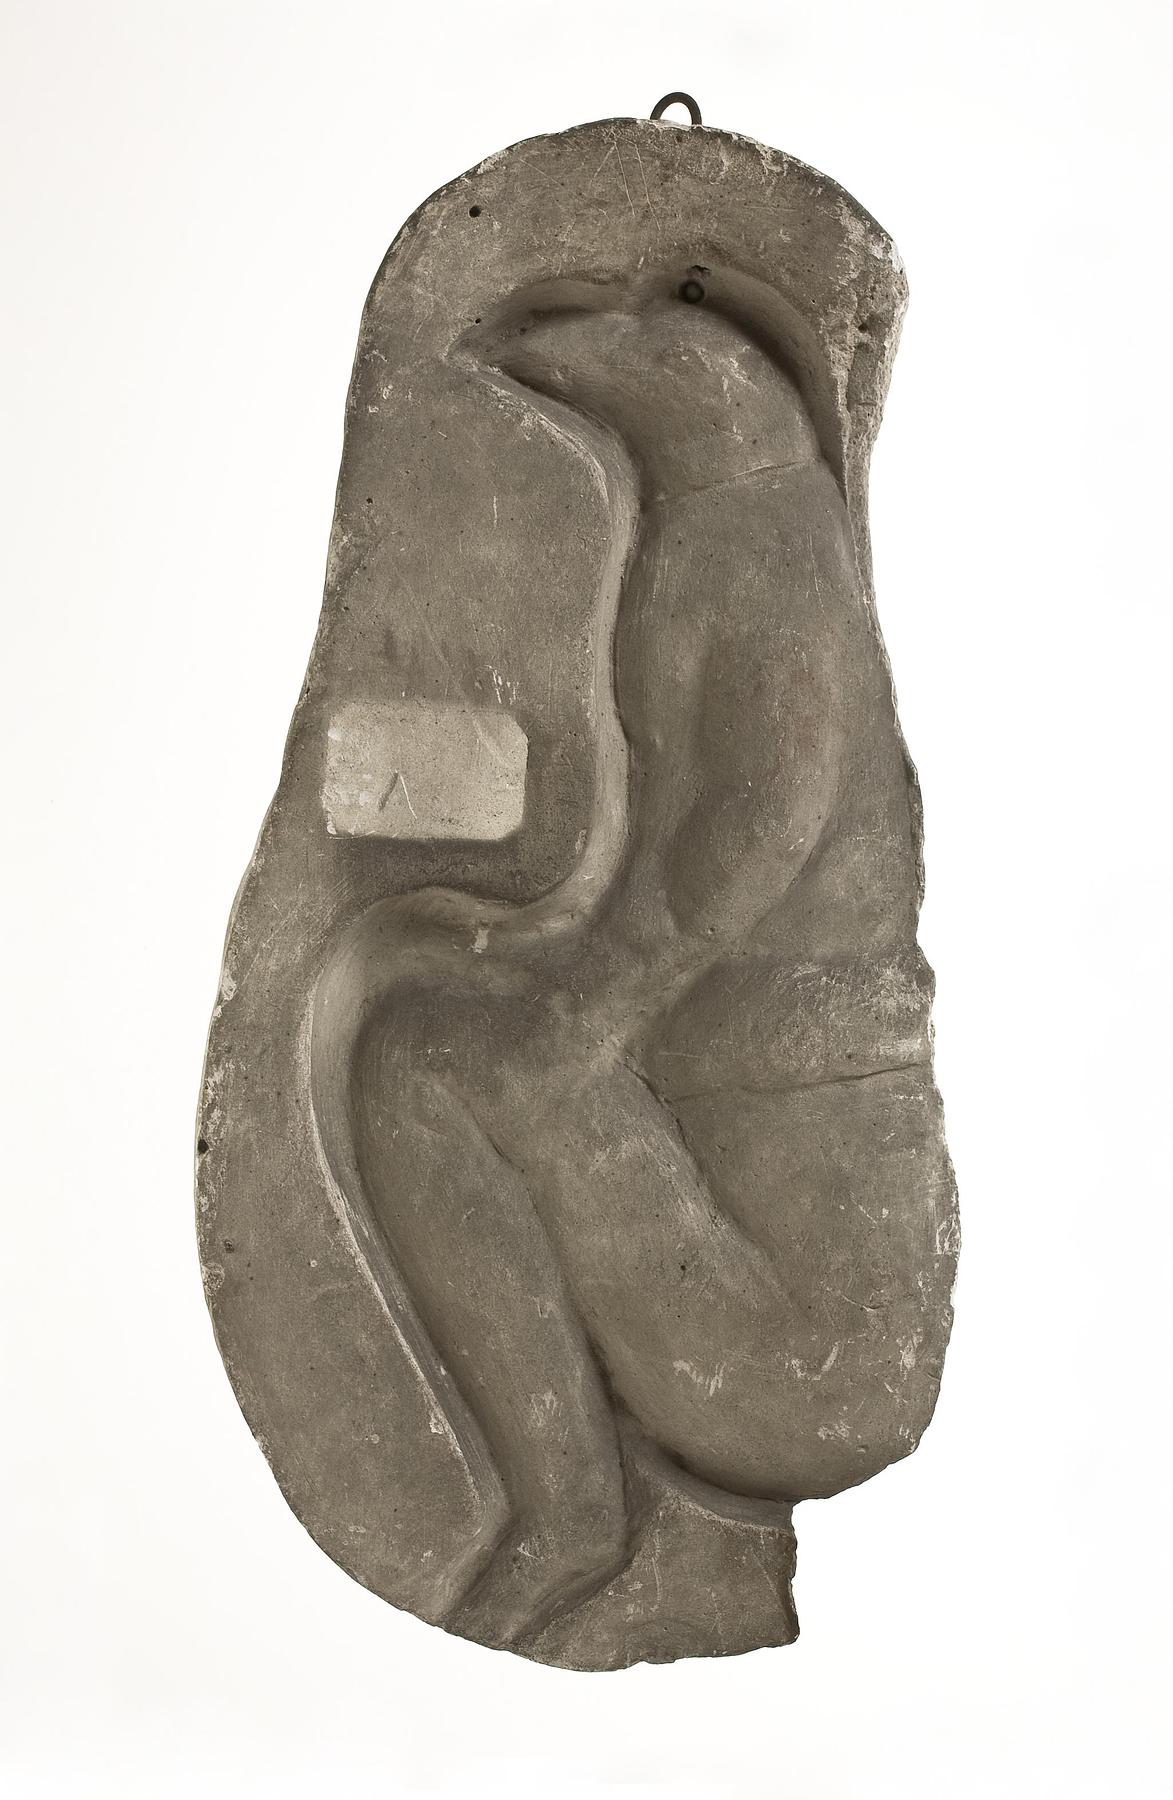 Seated figure with a falcon's head, L245